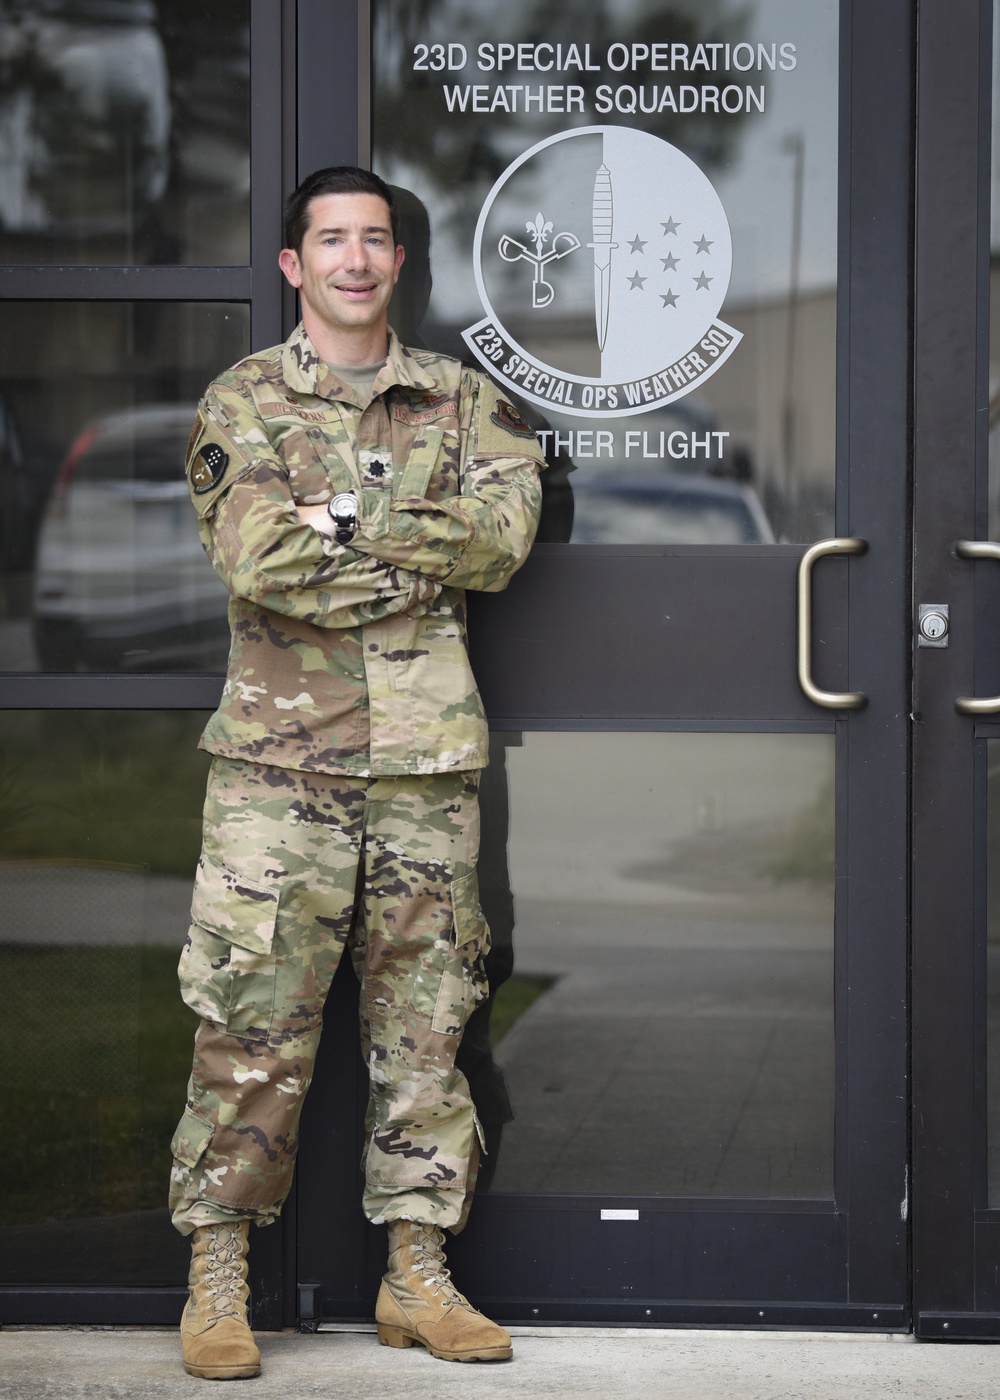 Lt. Col. Hermann takes command of the 23rd Special Operations Weather Squadron